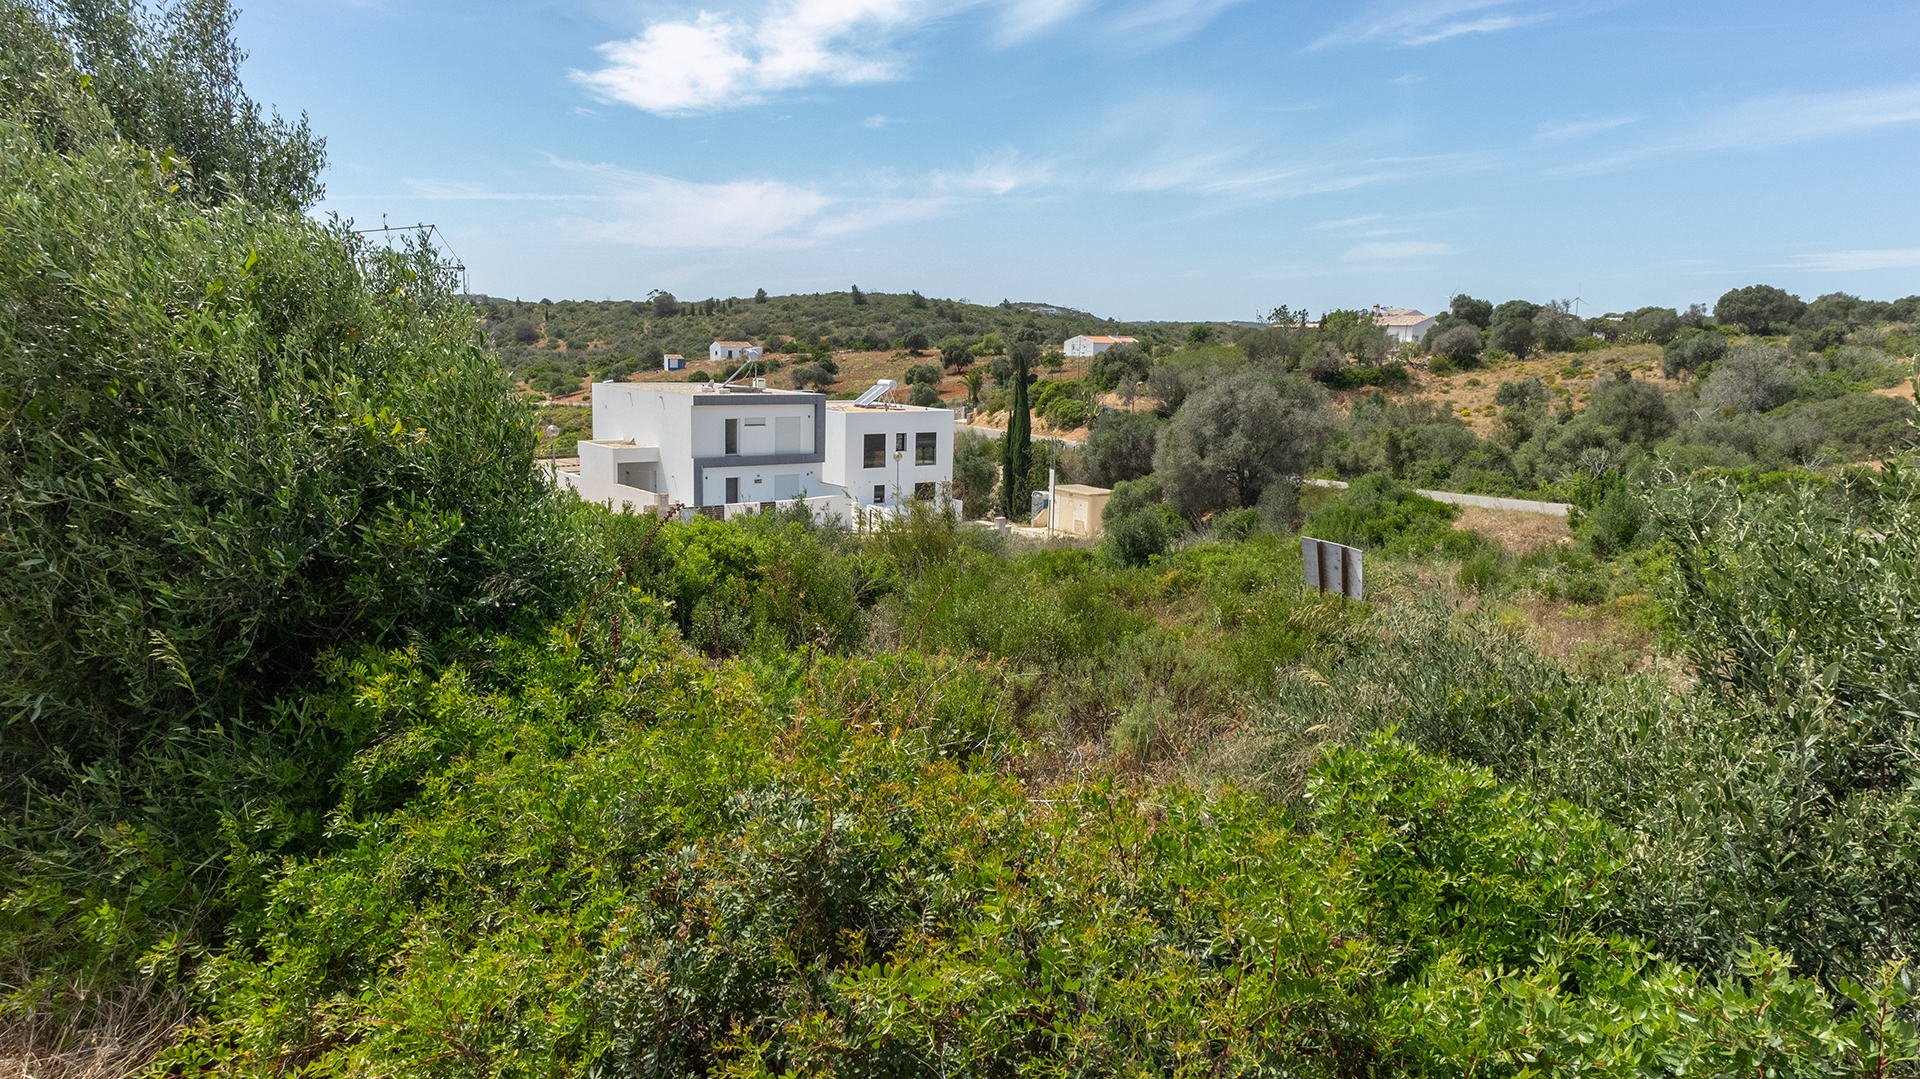 Elevated plot with sea view and building permit in Salema, Budens | LG2112 This sought-after plot is south facing with sea views. Set adjacent to the west Algarve coastline, and the magnificent Costa Vicentina, near Salema and Burgau, the plot is located in an area of traditional fishing villages, with plenty of beautiful beaches, amenities, shops and restaurants. There is a permit already in place for the plot - to build a villa with pool.